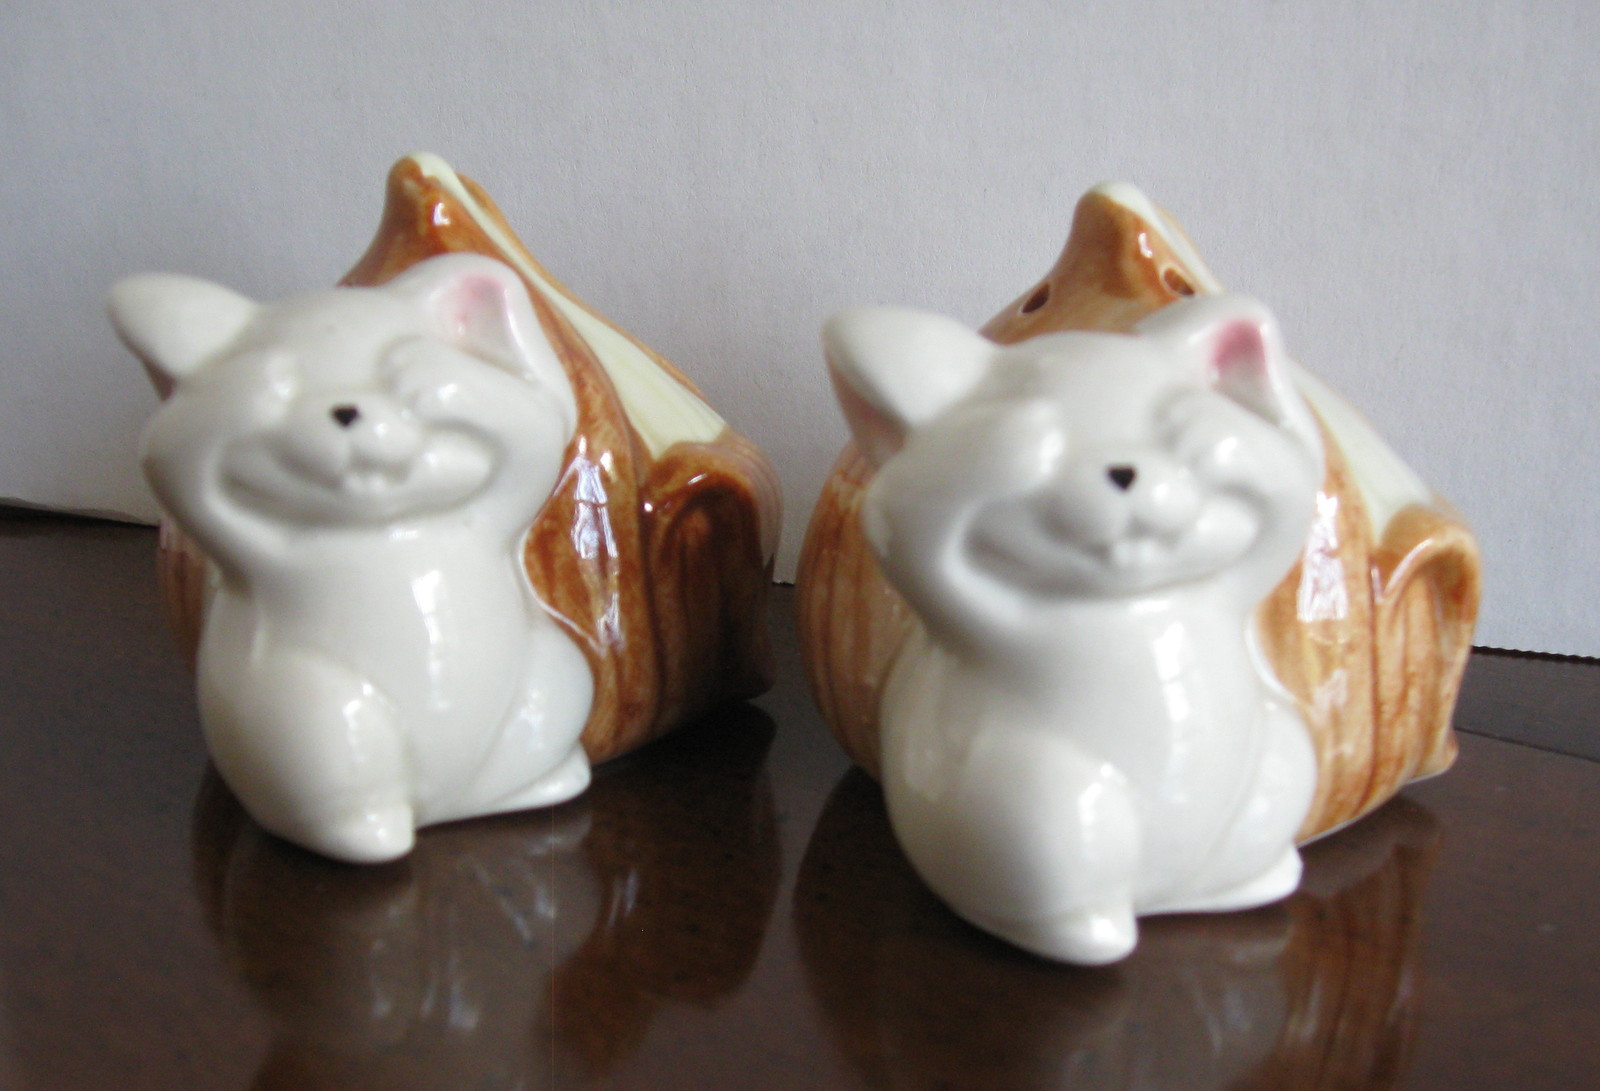 Fitz and Floyd Mice with Onions Salt and Pepper Shaker Set - Hand Painted Japan - $18.00